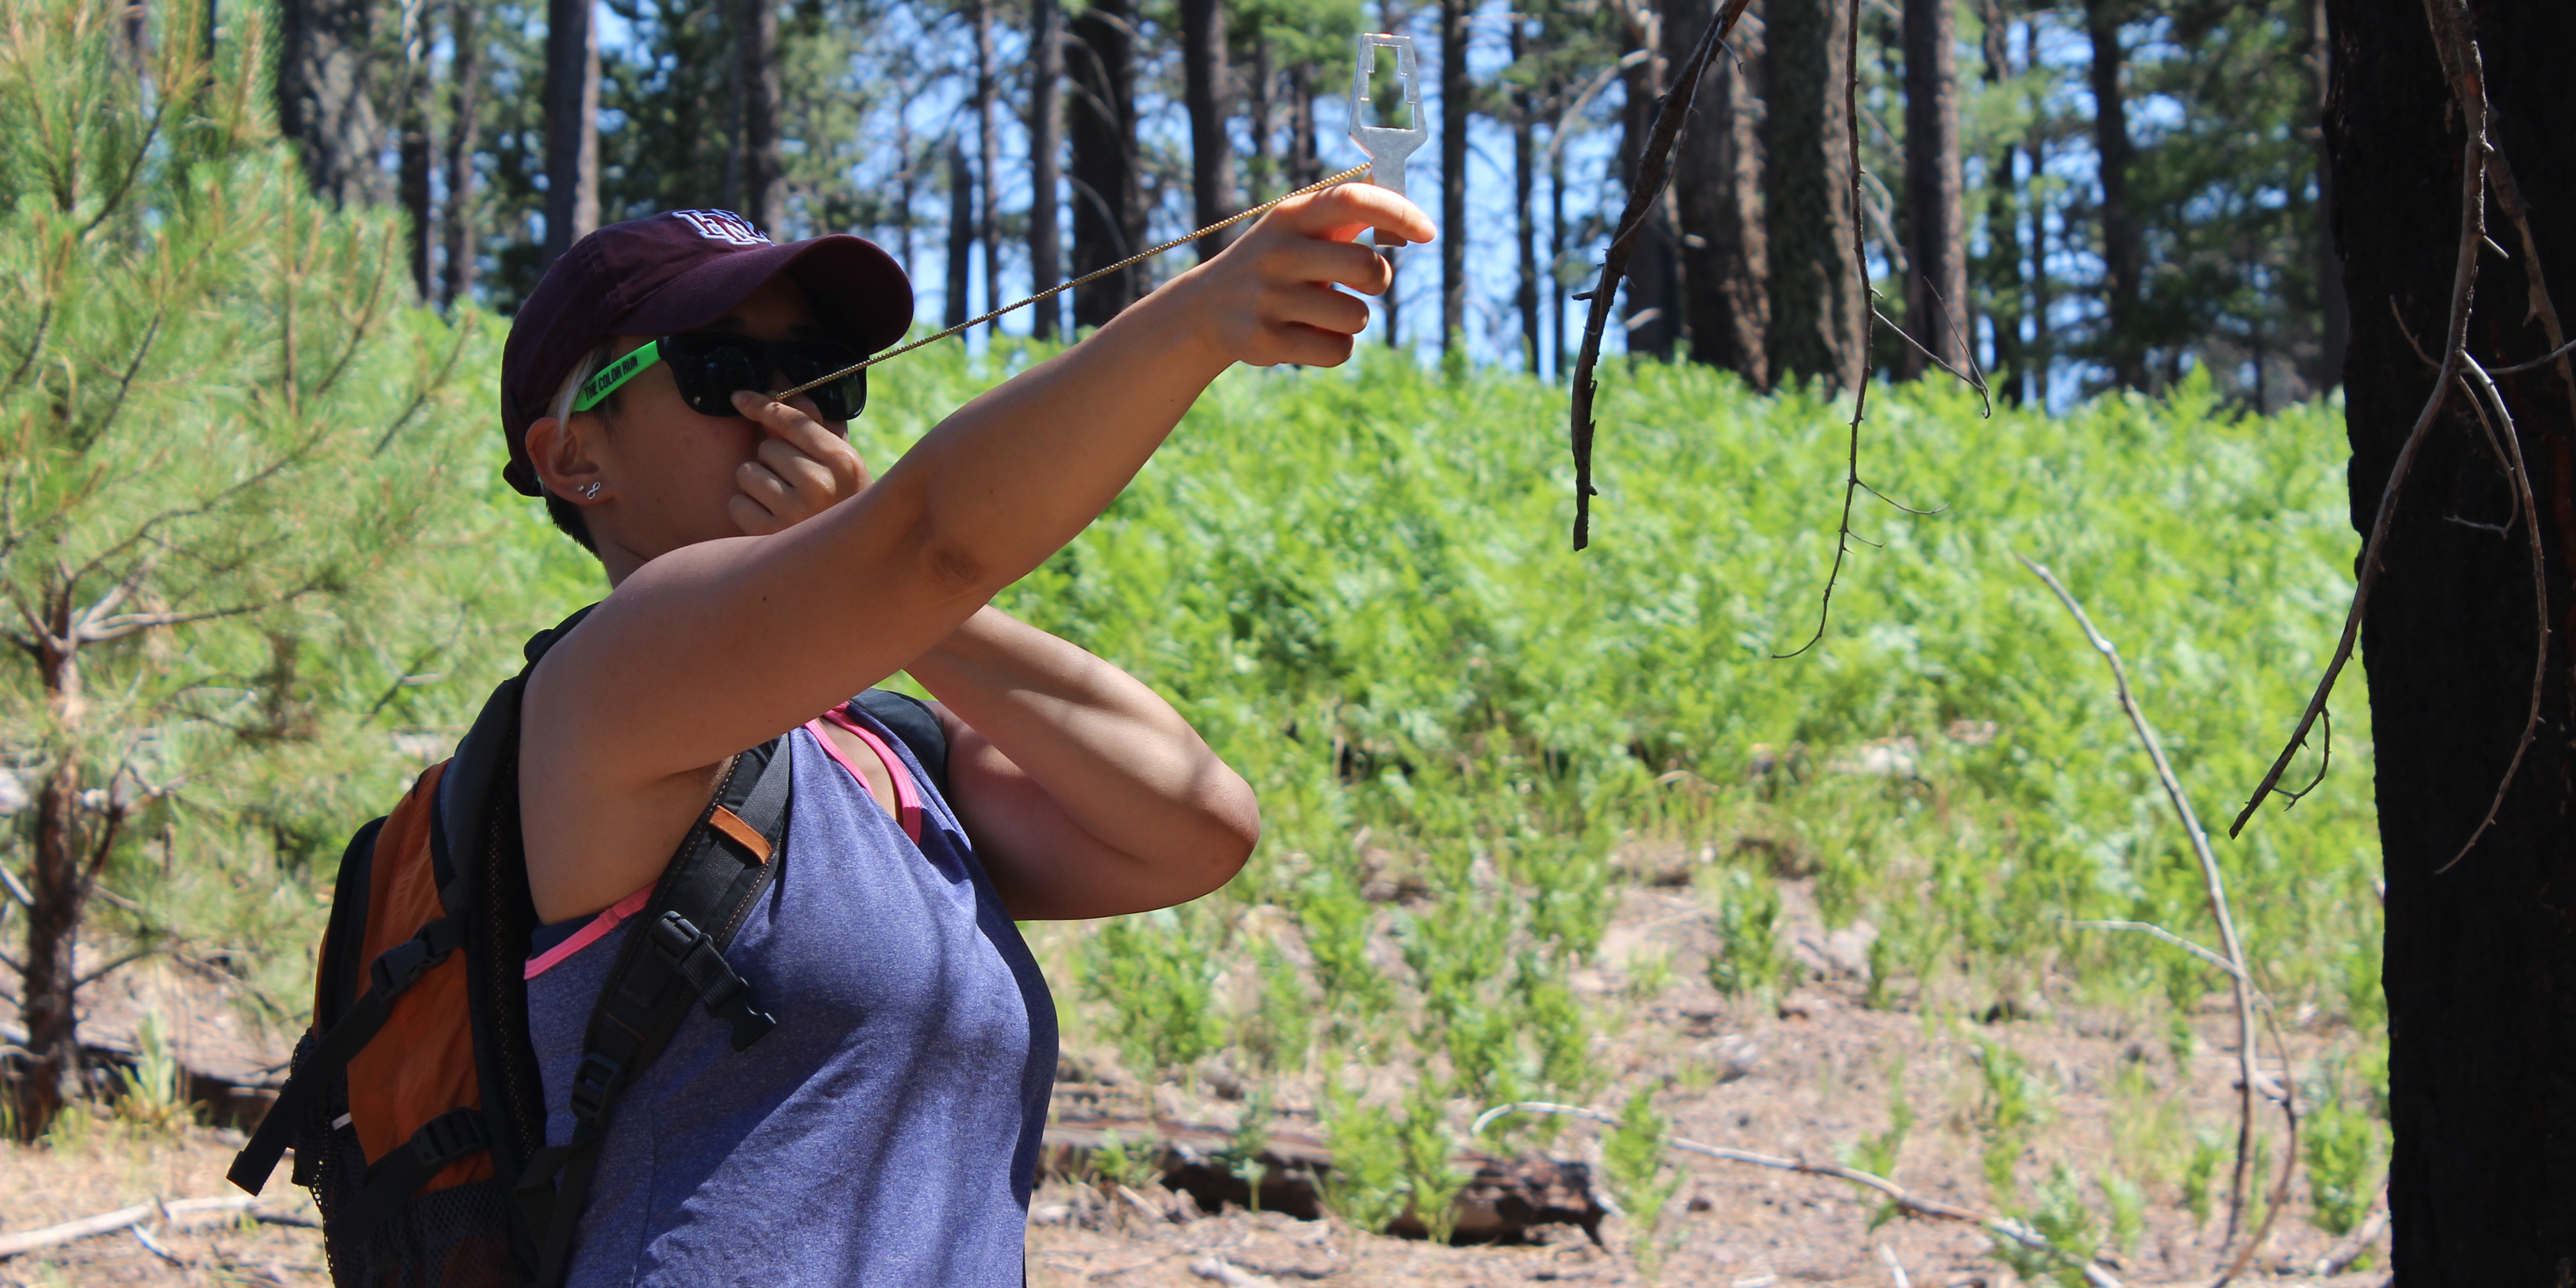 Earthwatch has awarded fellowships to nearly 2,000 high school students through our Ignite and Girls in Science programs, and nearly 6,000 educators from all grades and disciplines through our Teach Earth and Project Kindle fellowships.